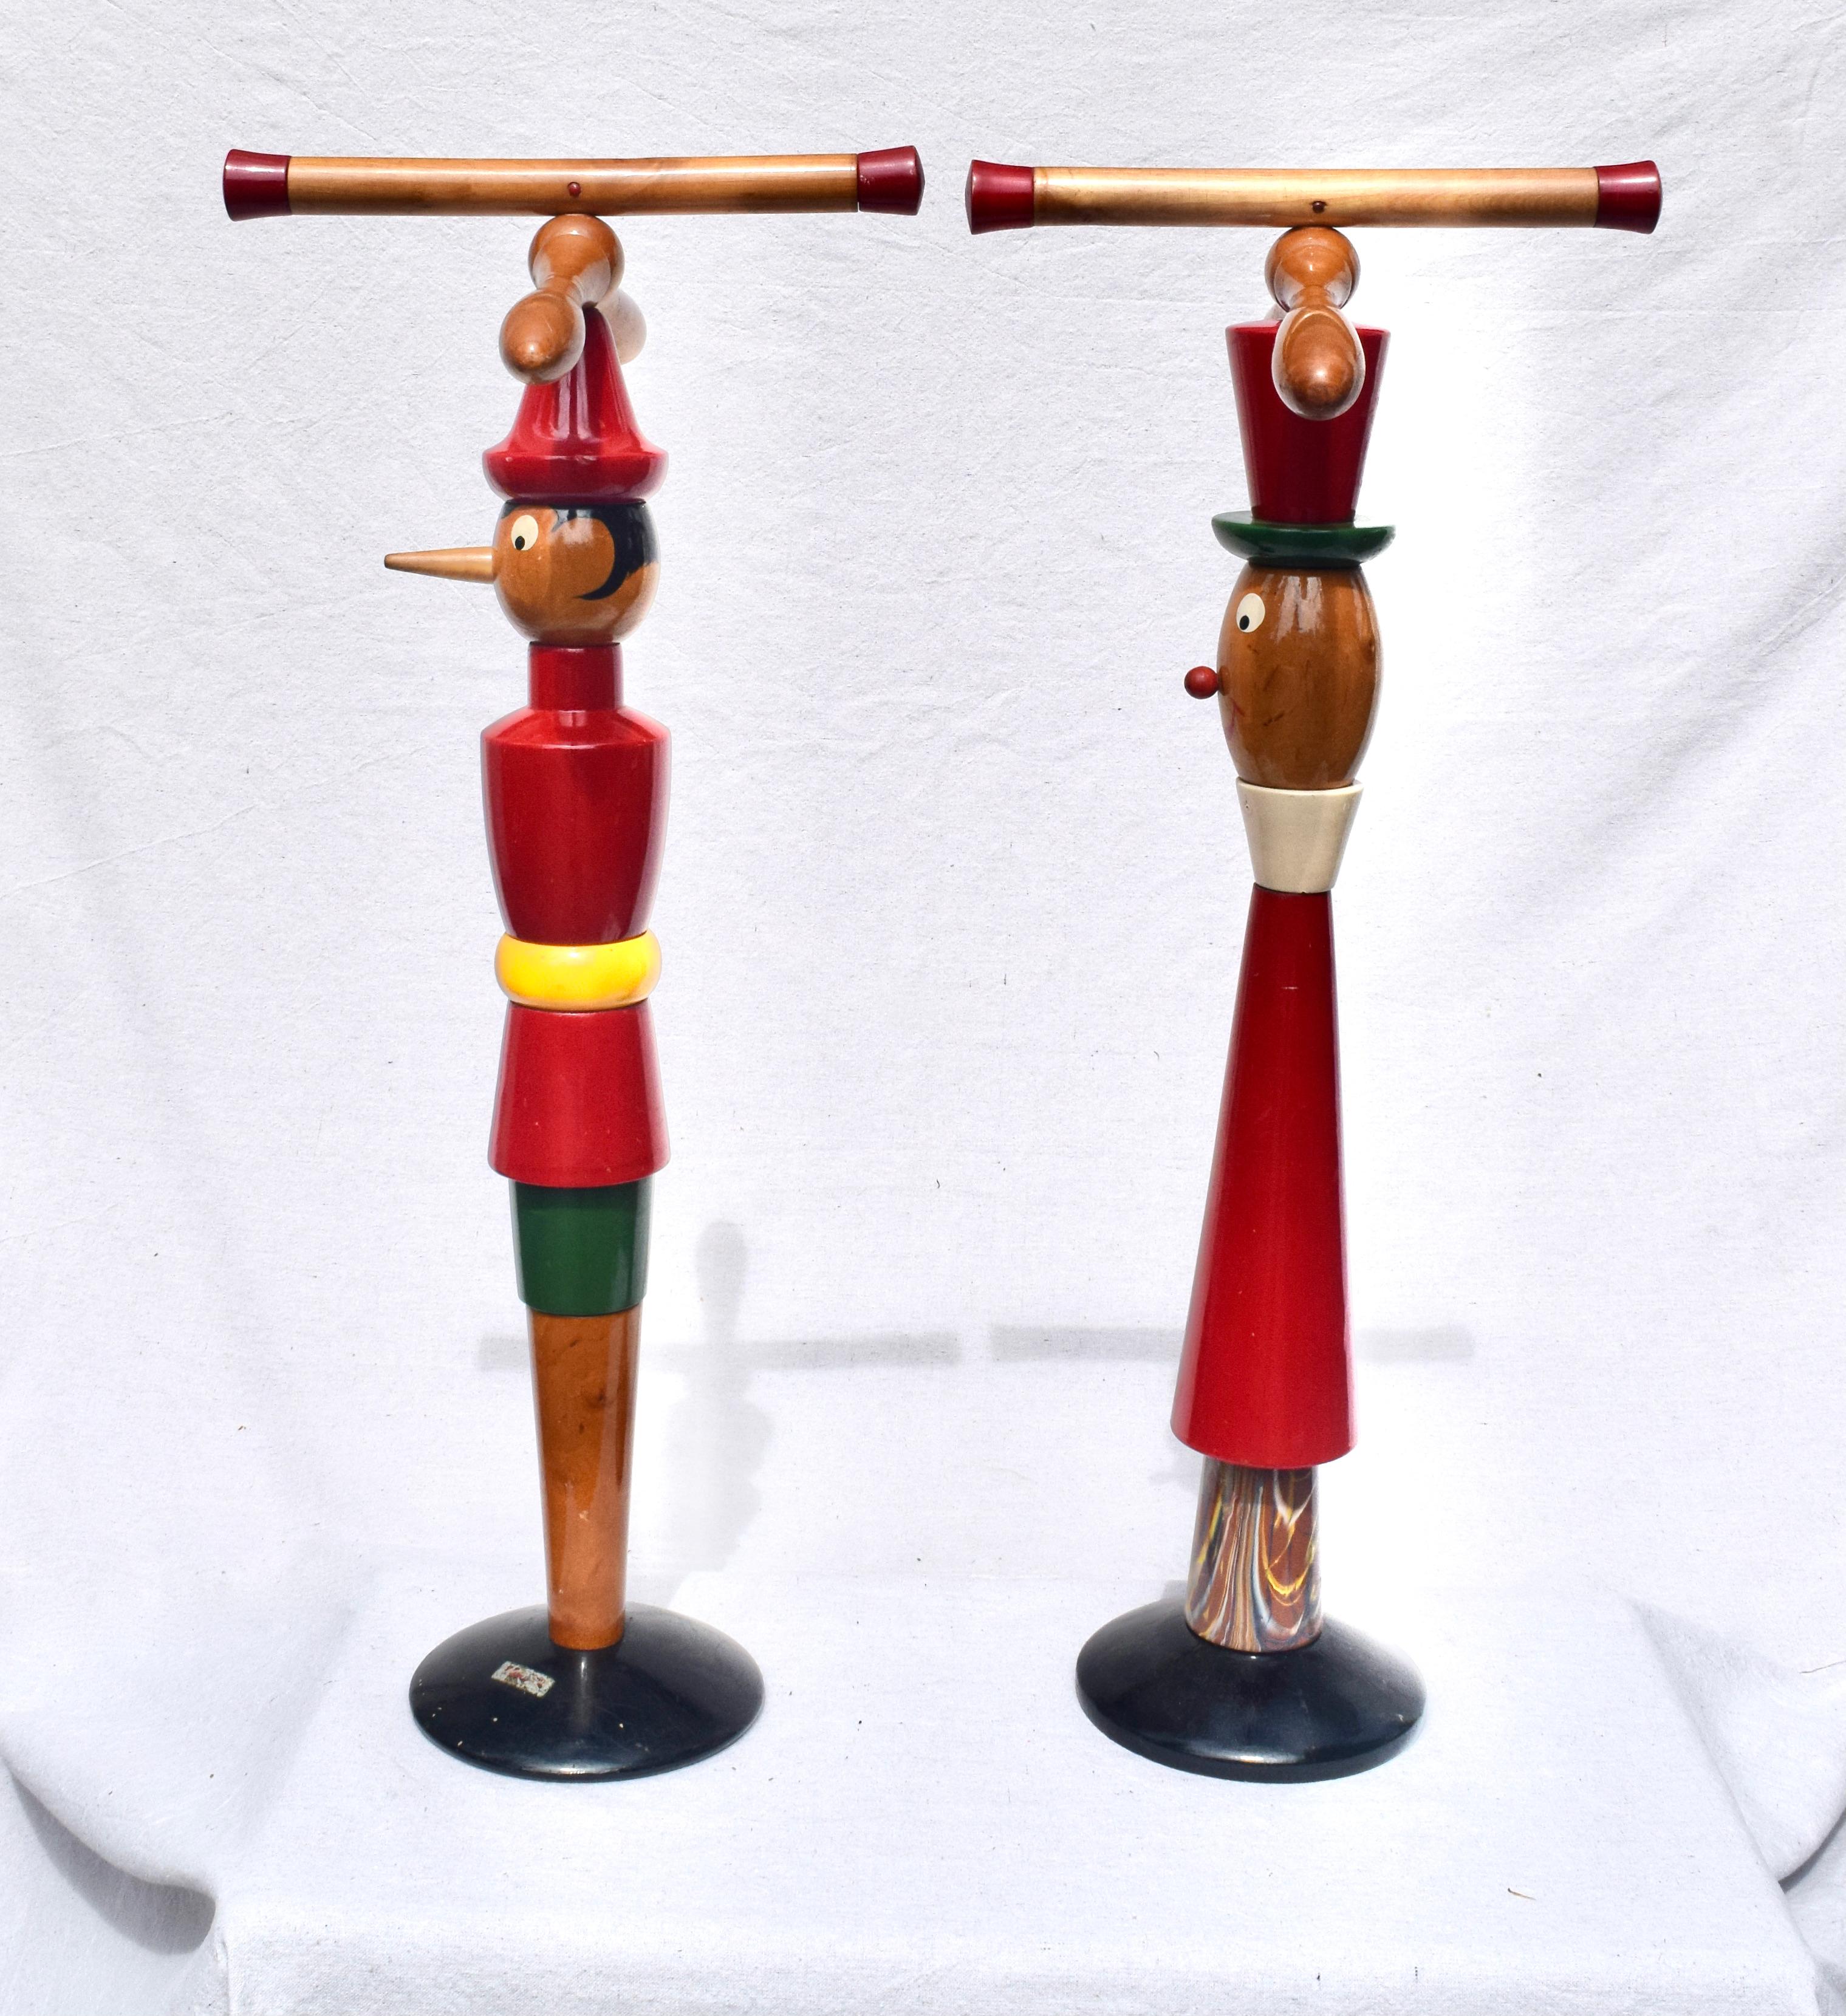 Valet Stands Pinocchio & Jiminy Cricket, 1940s Italian Design For Sale 2